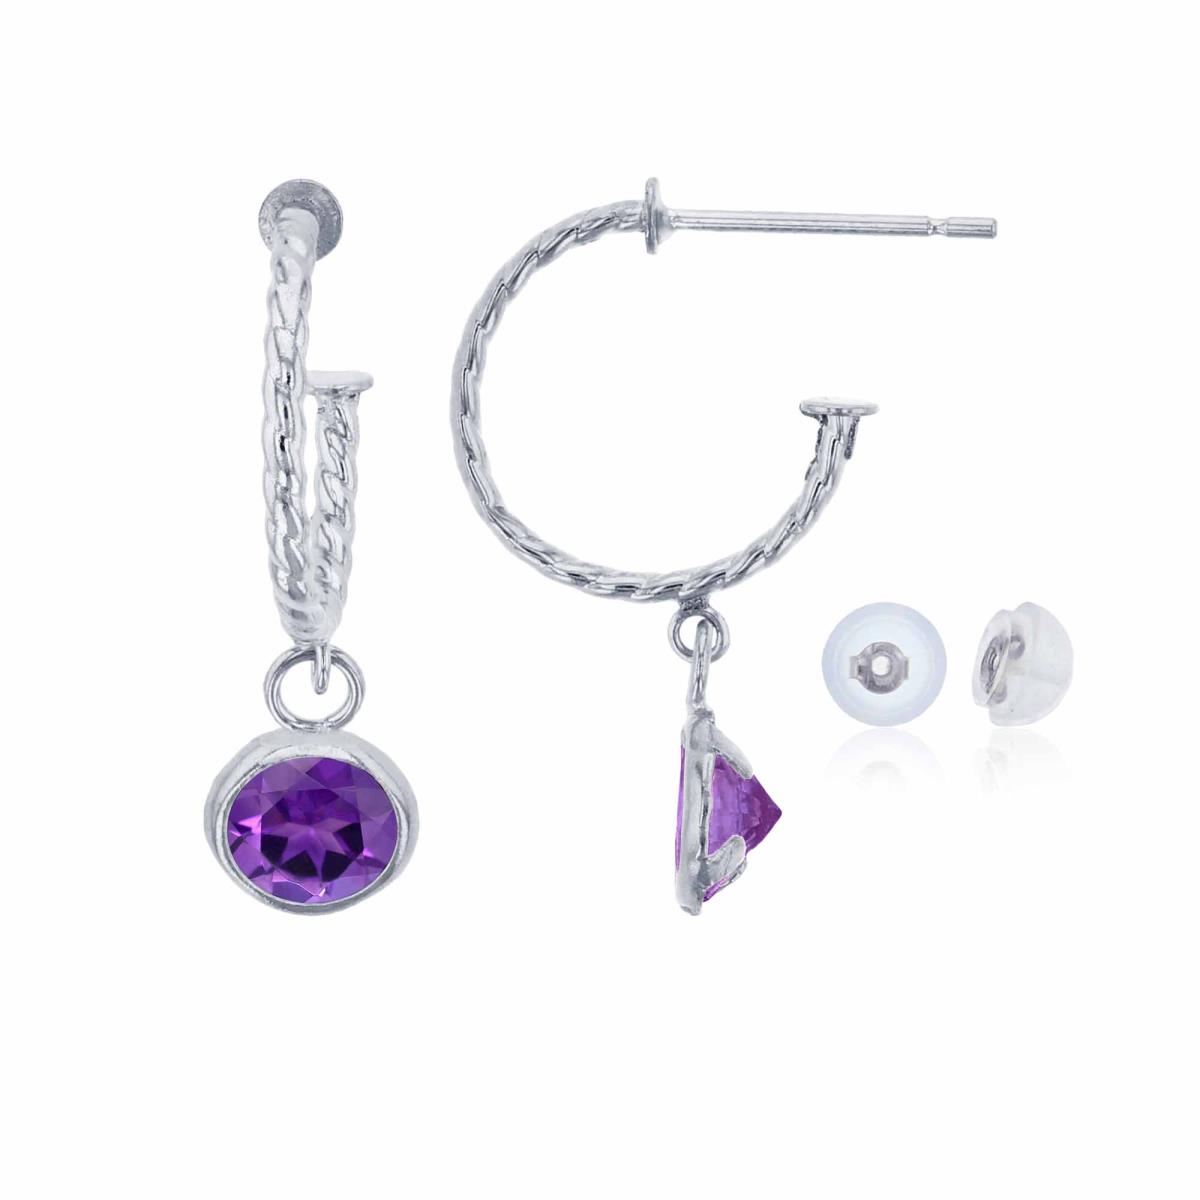 10K White Gold 12mm Rope Half-Hoop with 5mm Rd Amethyst Bezel Drop Earring with Silicone Back